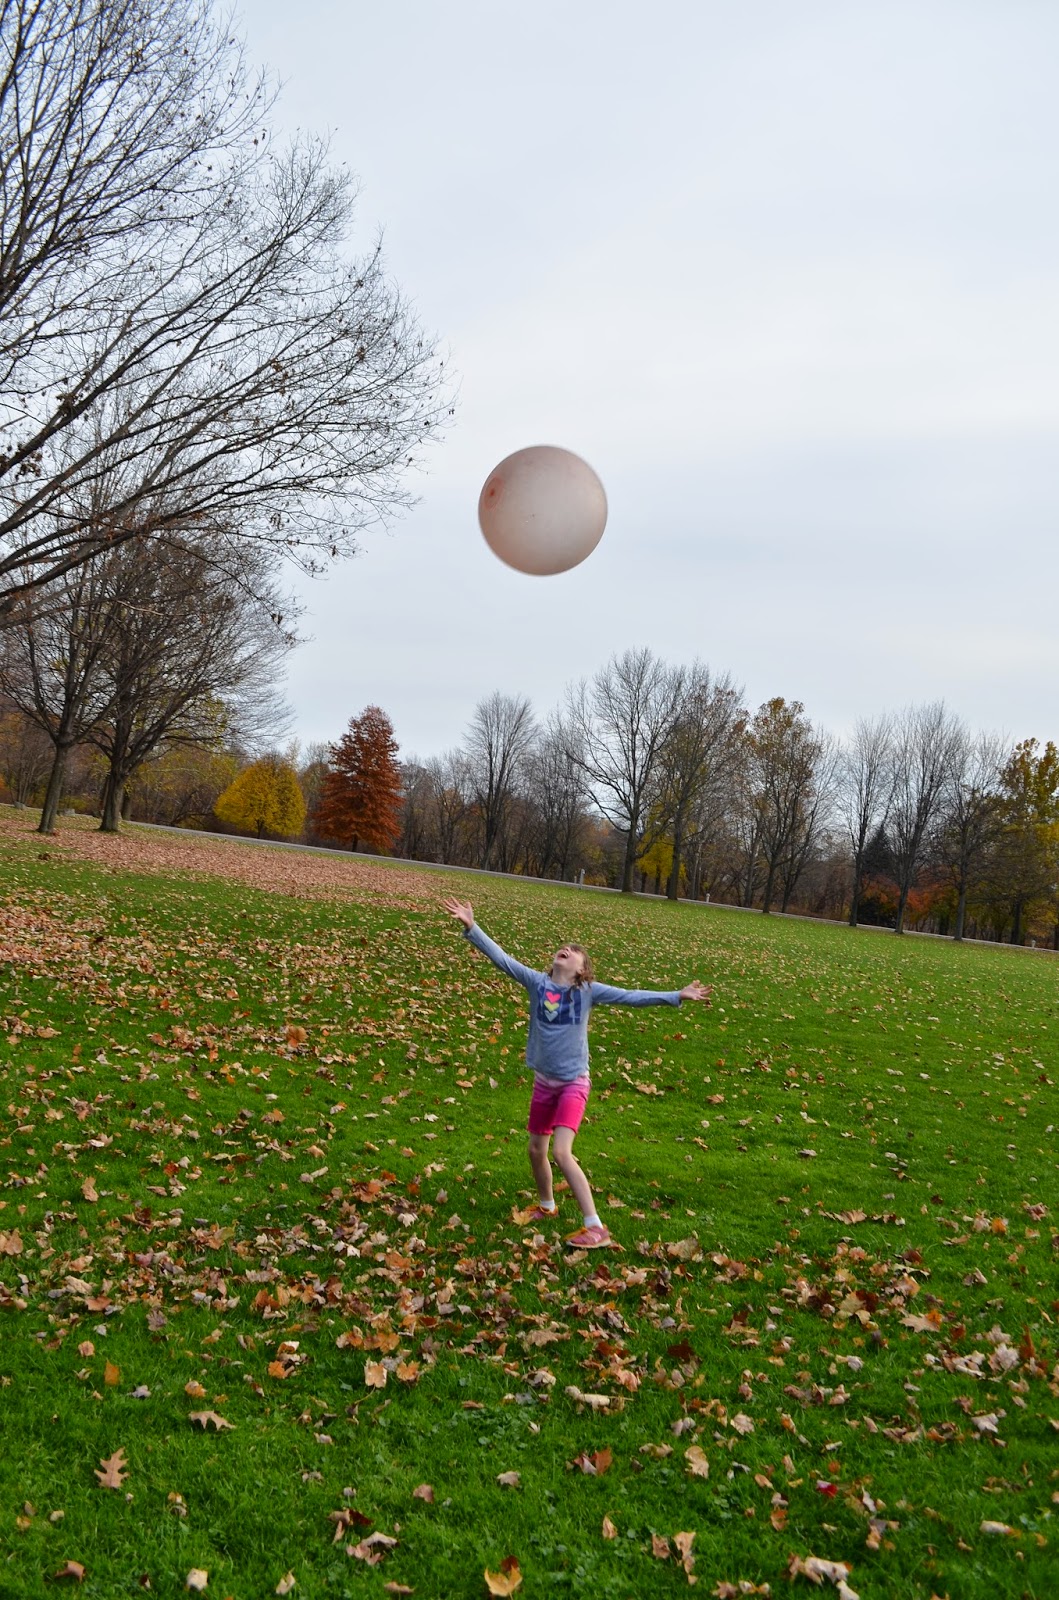 Enjoying a warm Fall day with our Wubble Ball! #wubbleball